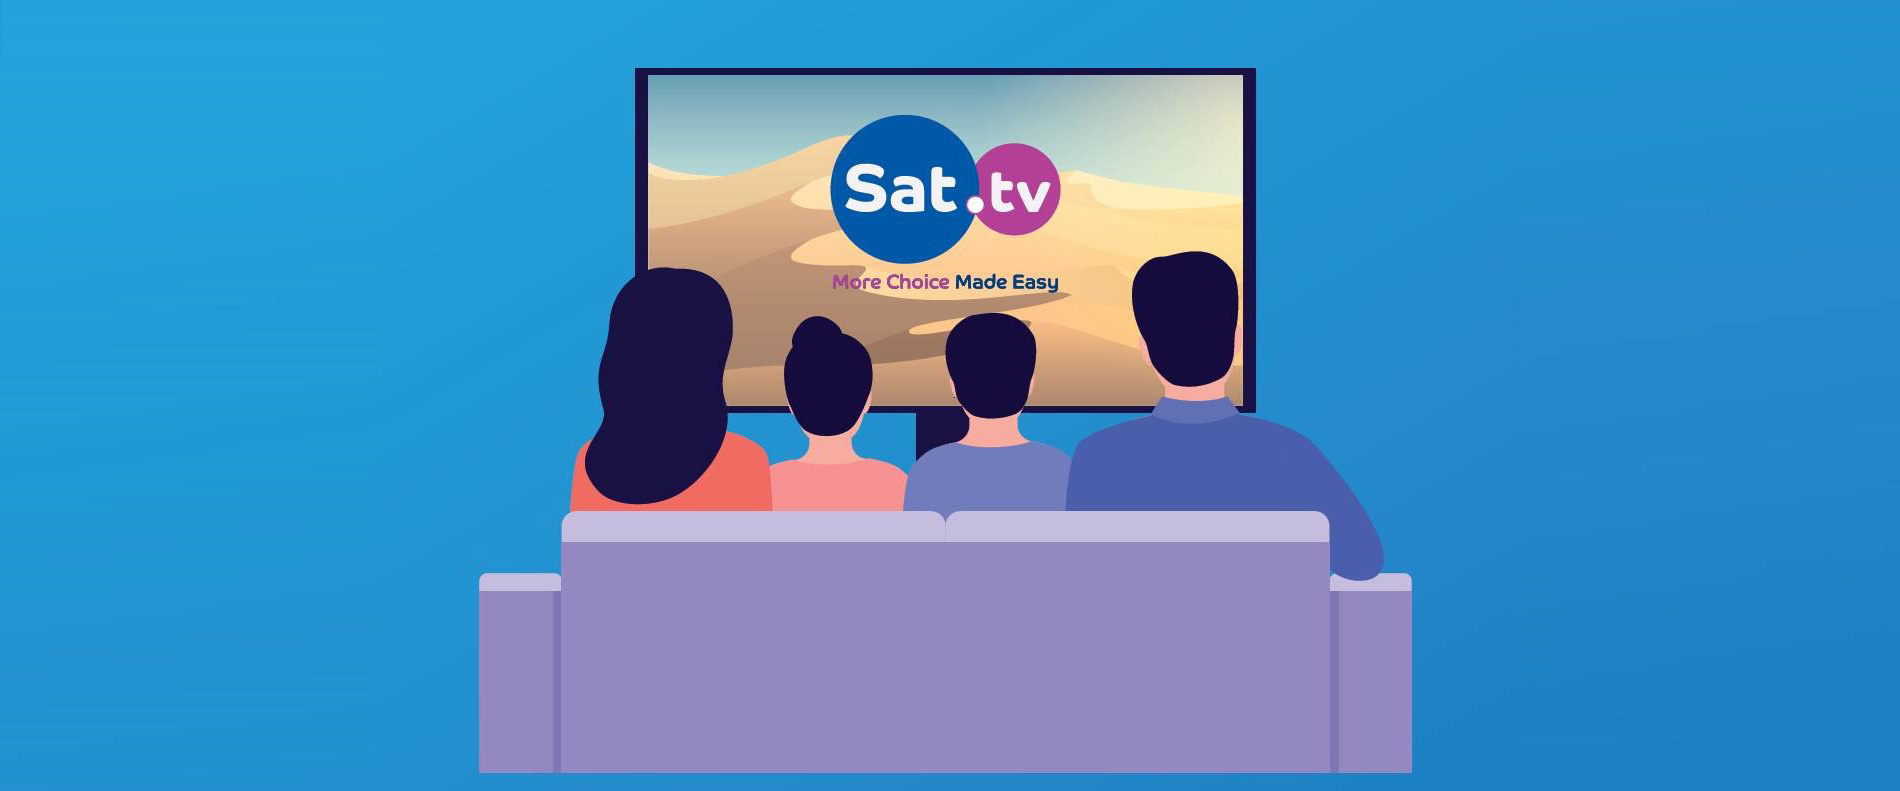 Sat.tv, more choice, made easy